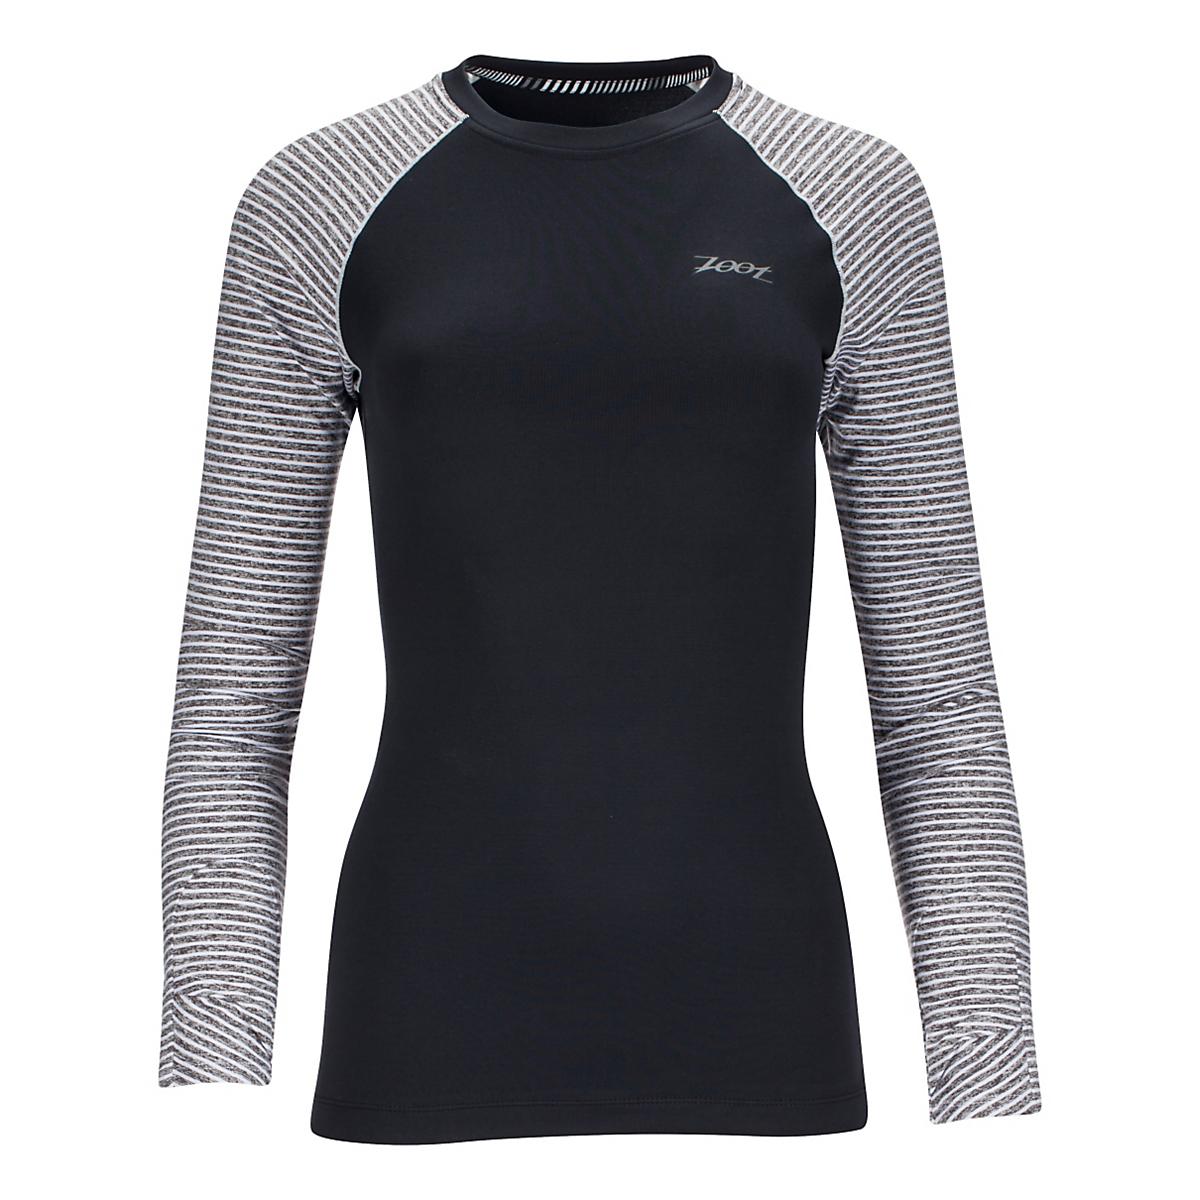 Womens R-Gear Set The Tone Long Sleeve No Zip Technical Tops at Road ...